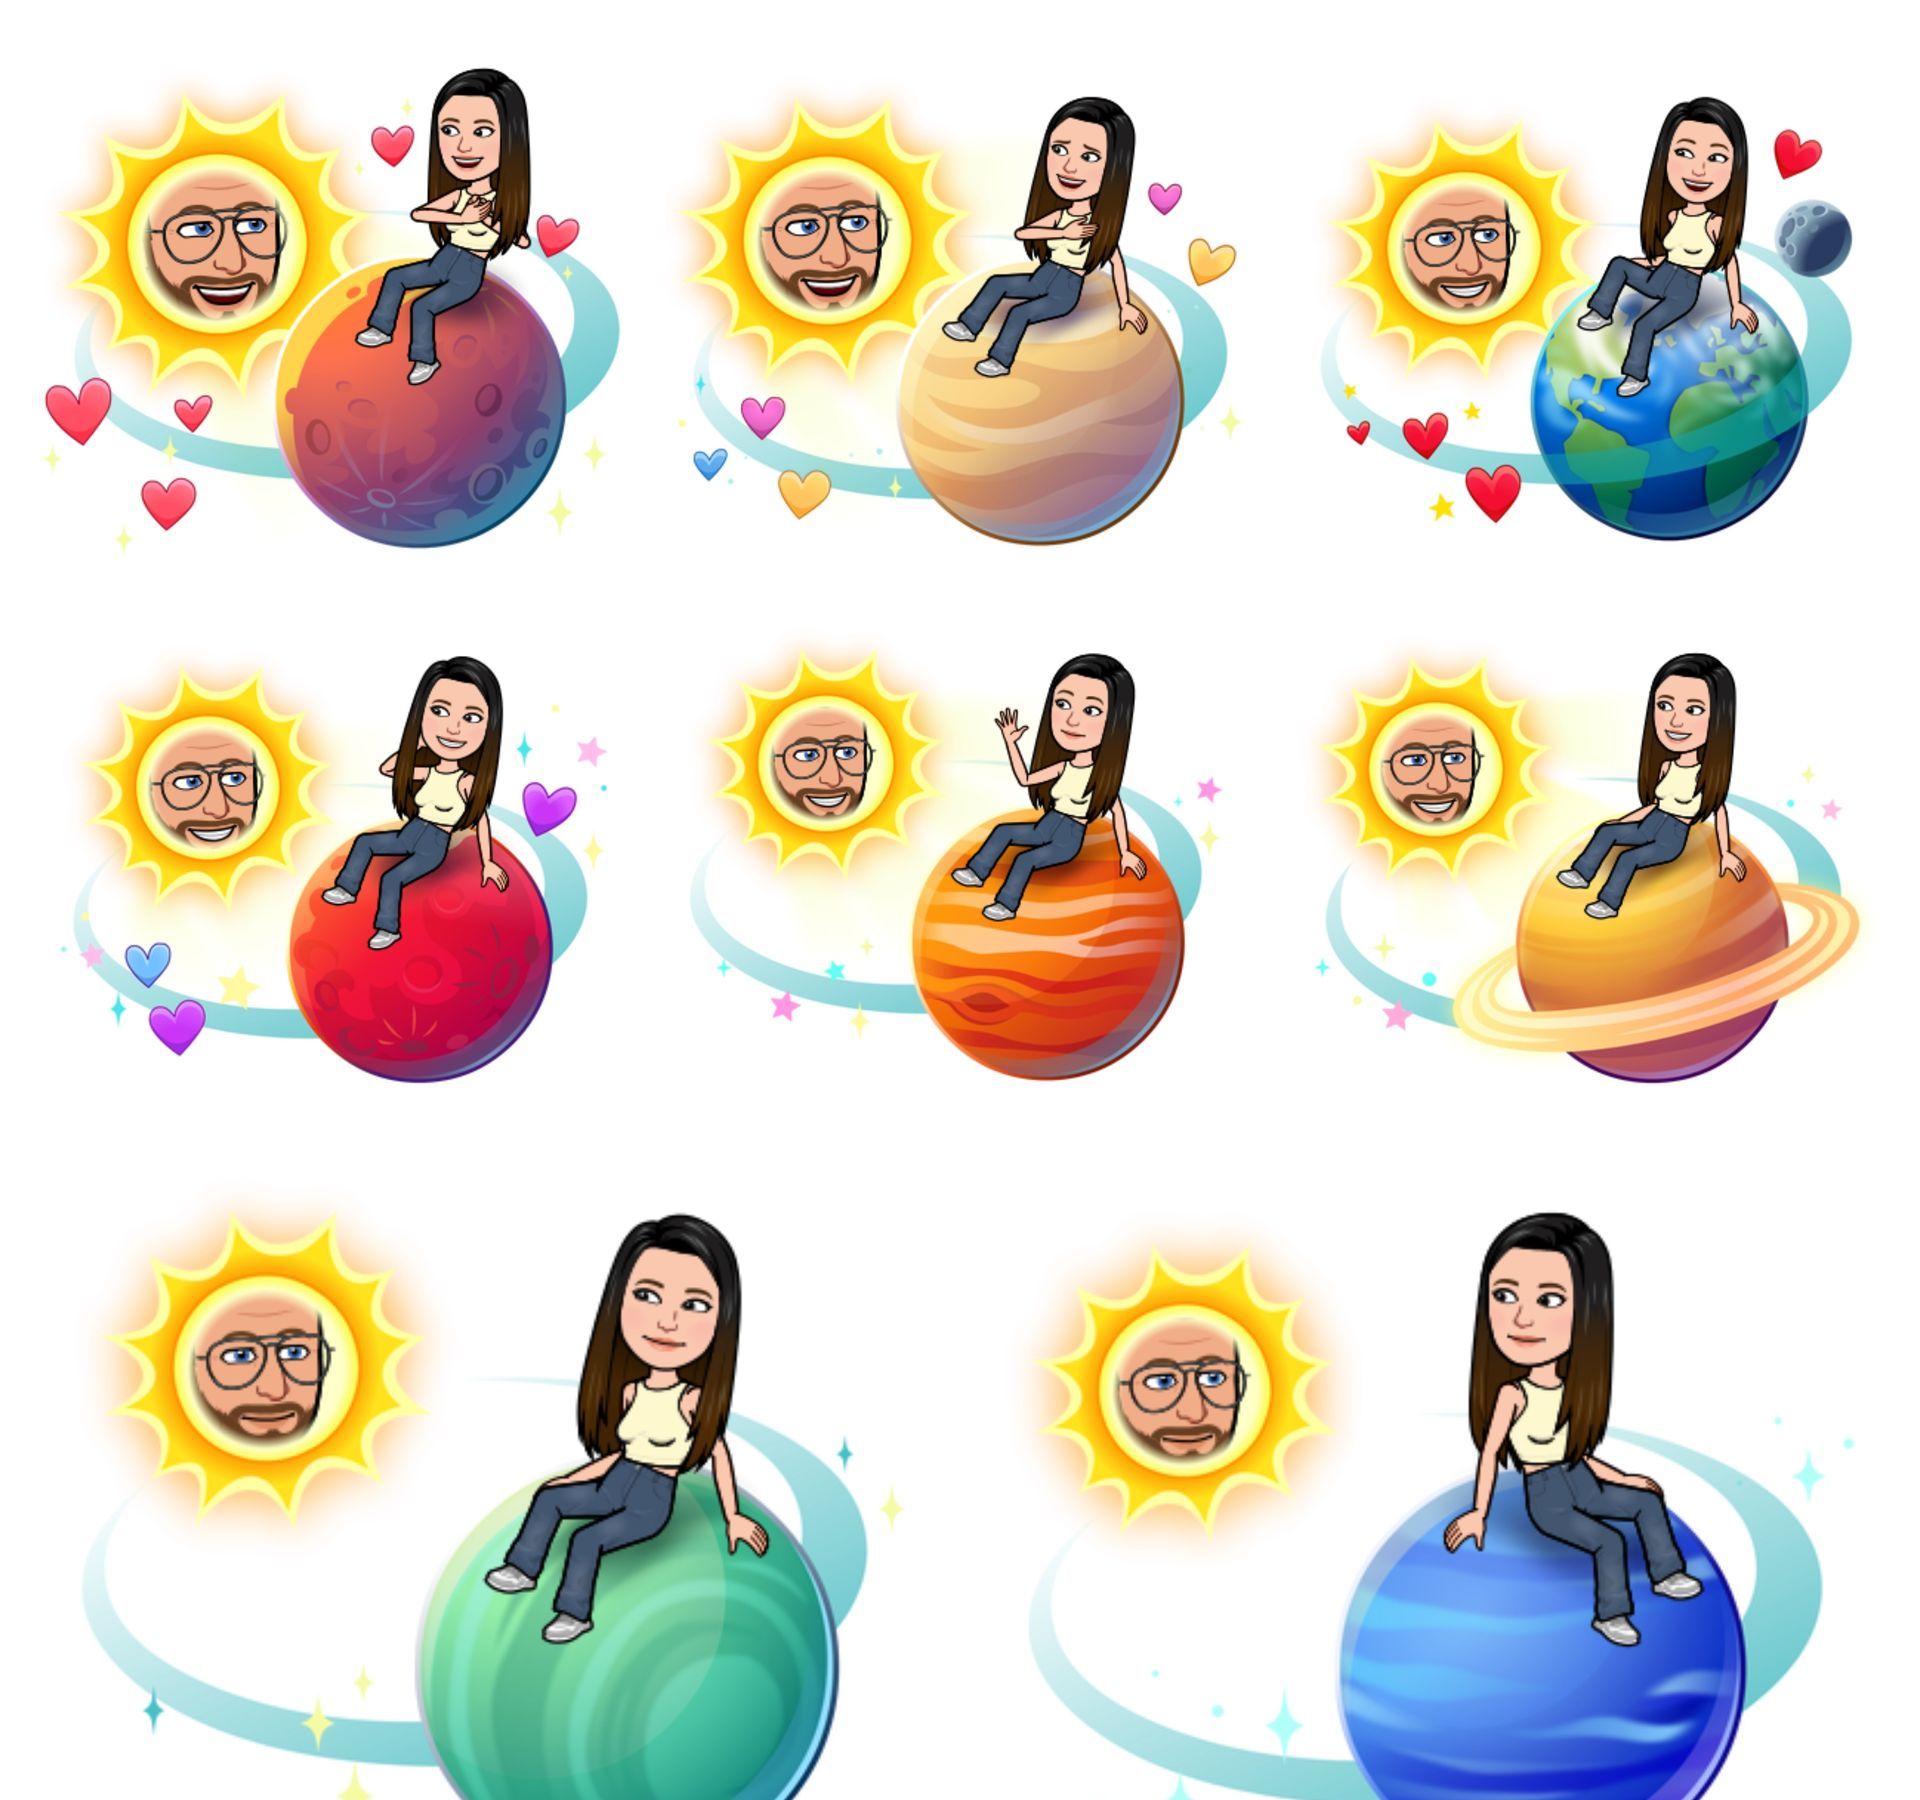 In this article, we will cover the Snapchat Plus best friends list, so you can learn who your closest Snapchat friends are and how the Snapchat solar system works.